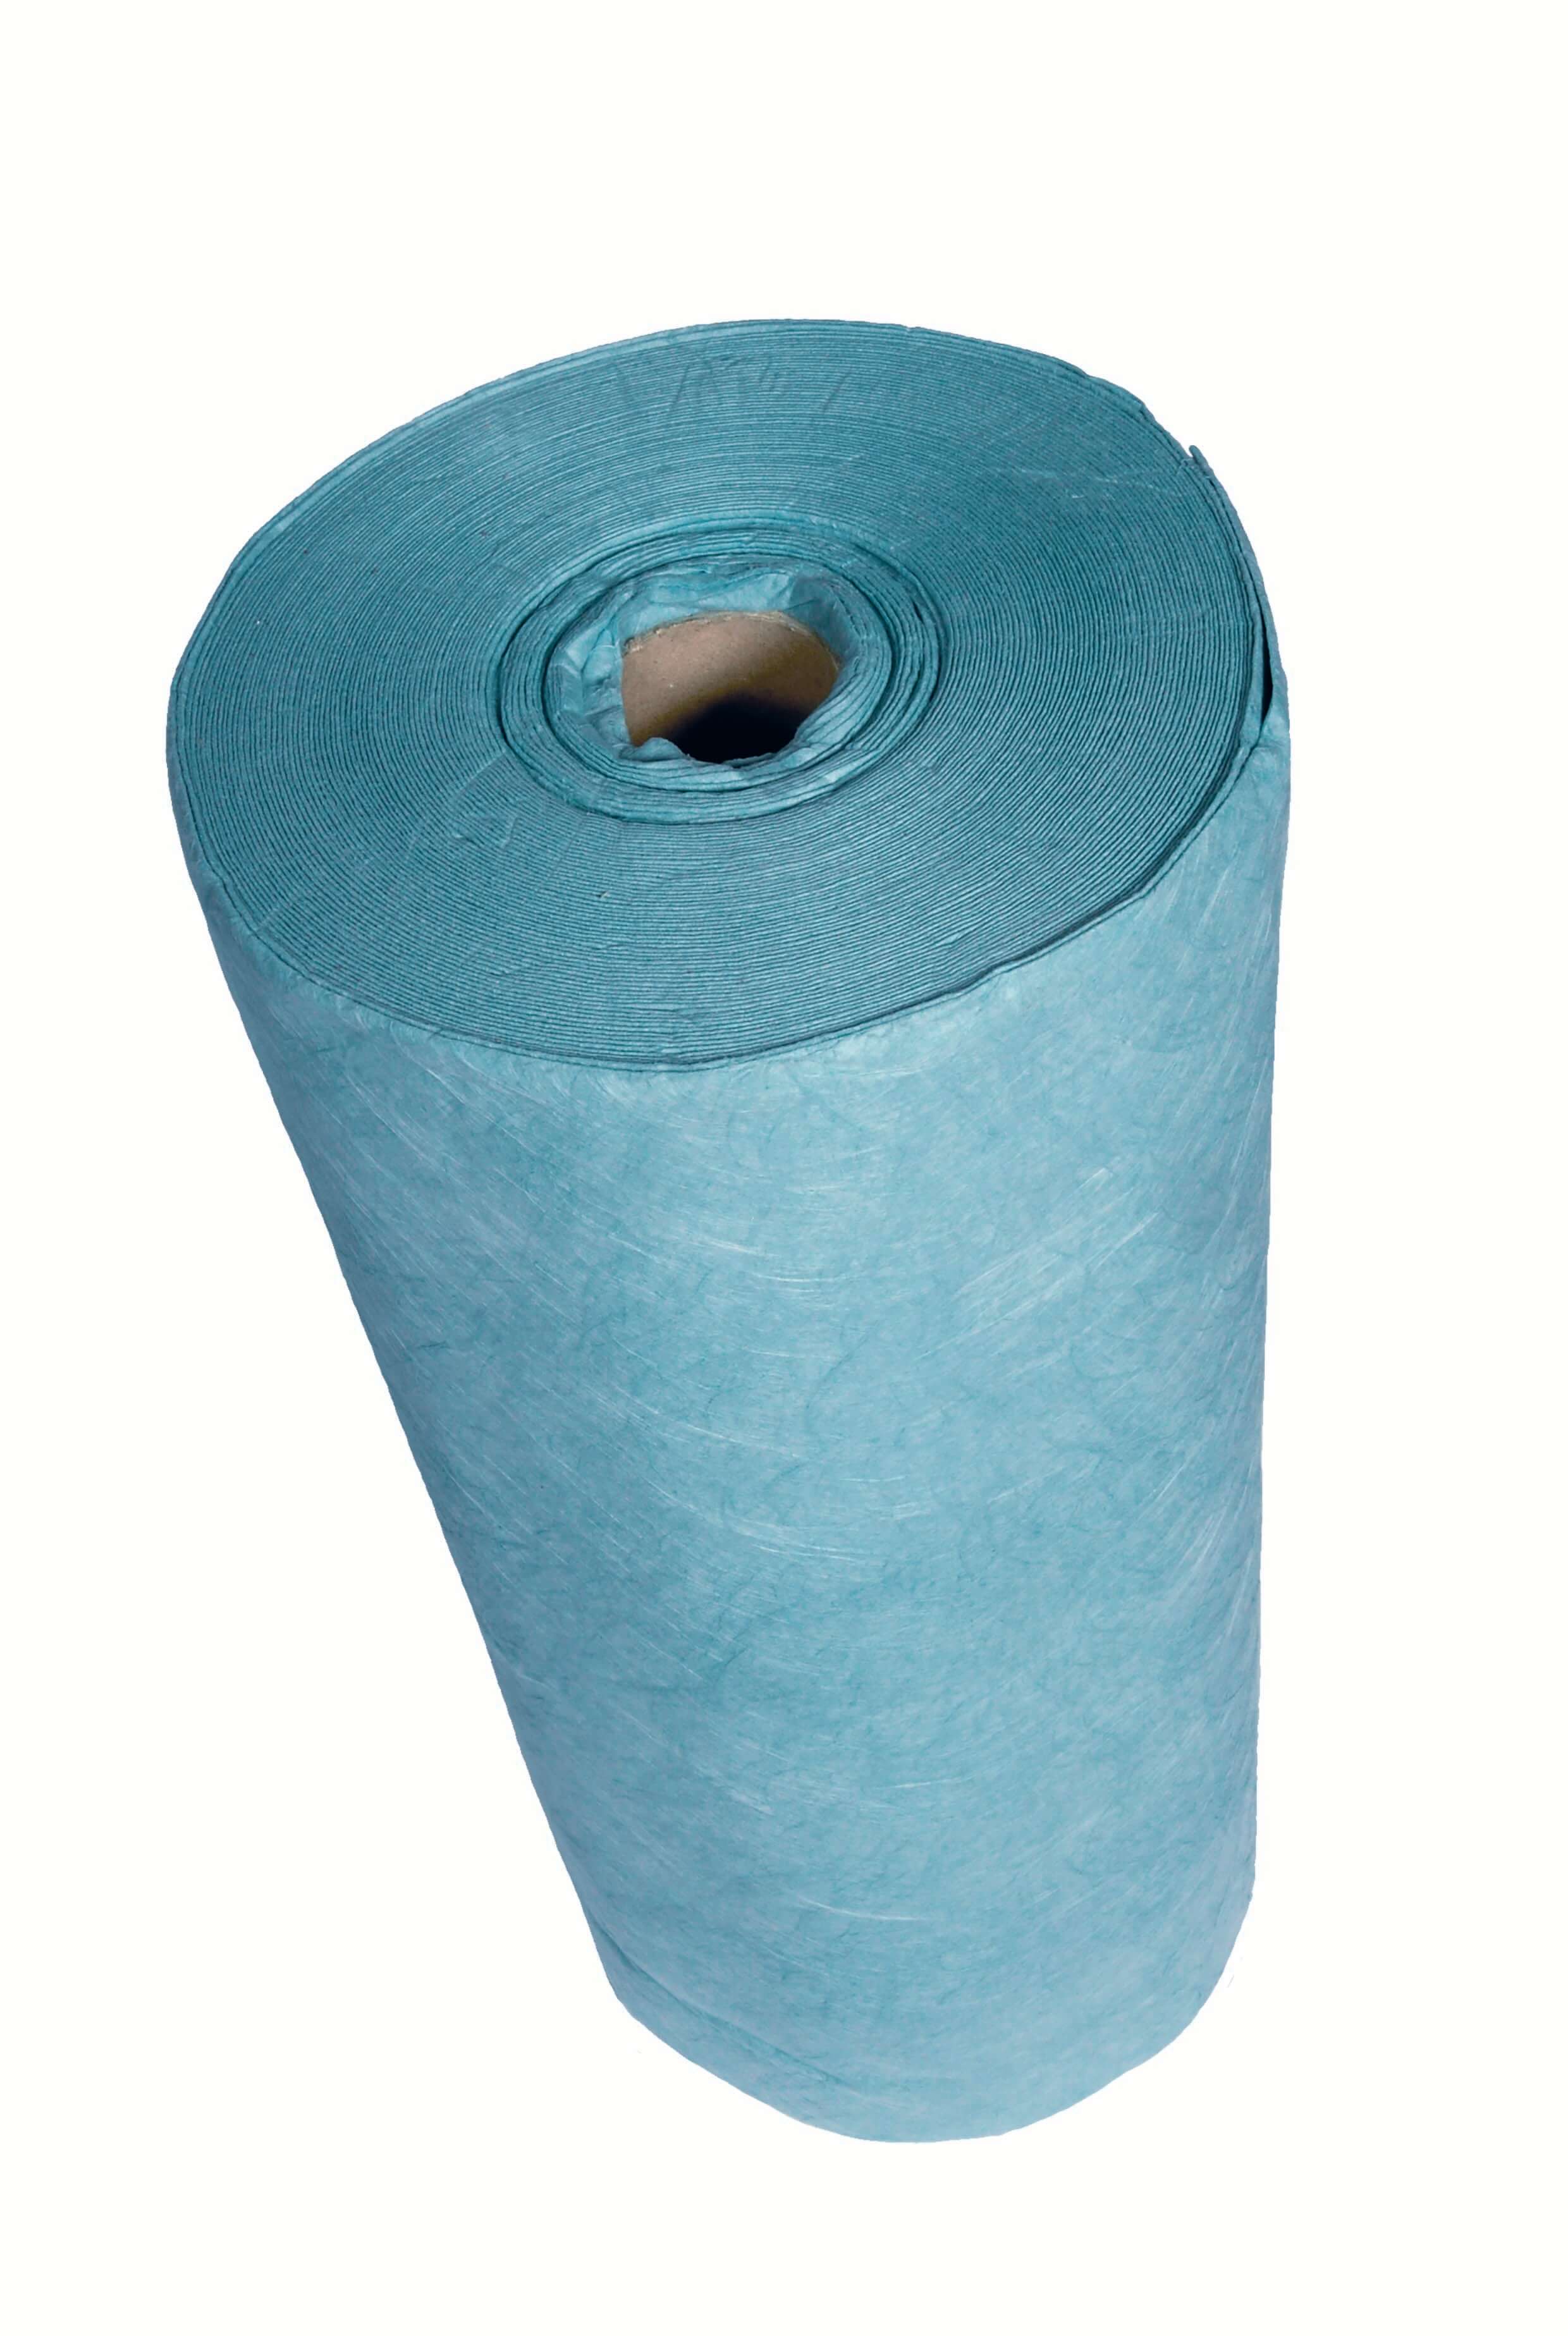 Premium-Weight Hydraulic Absorbent Roll 80cm x 52M, Polywrapped 